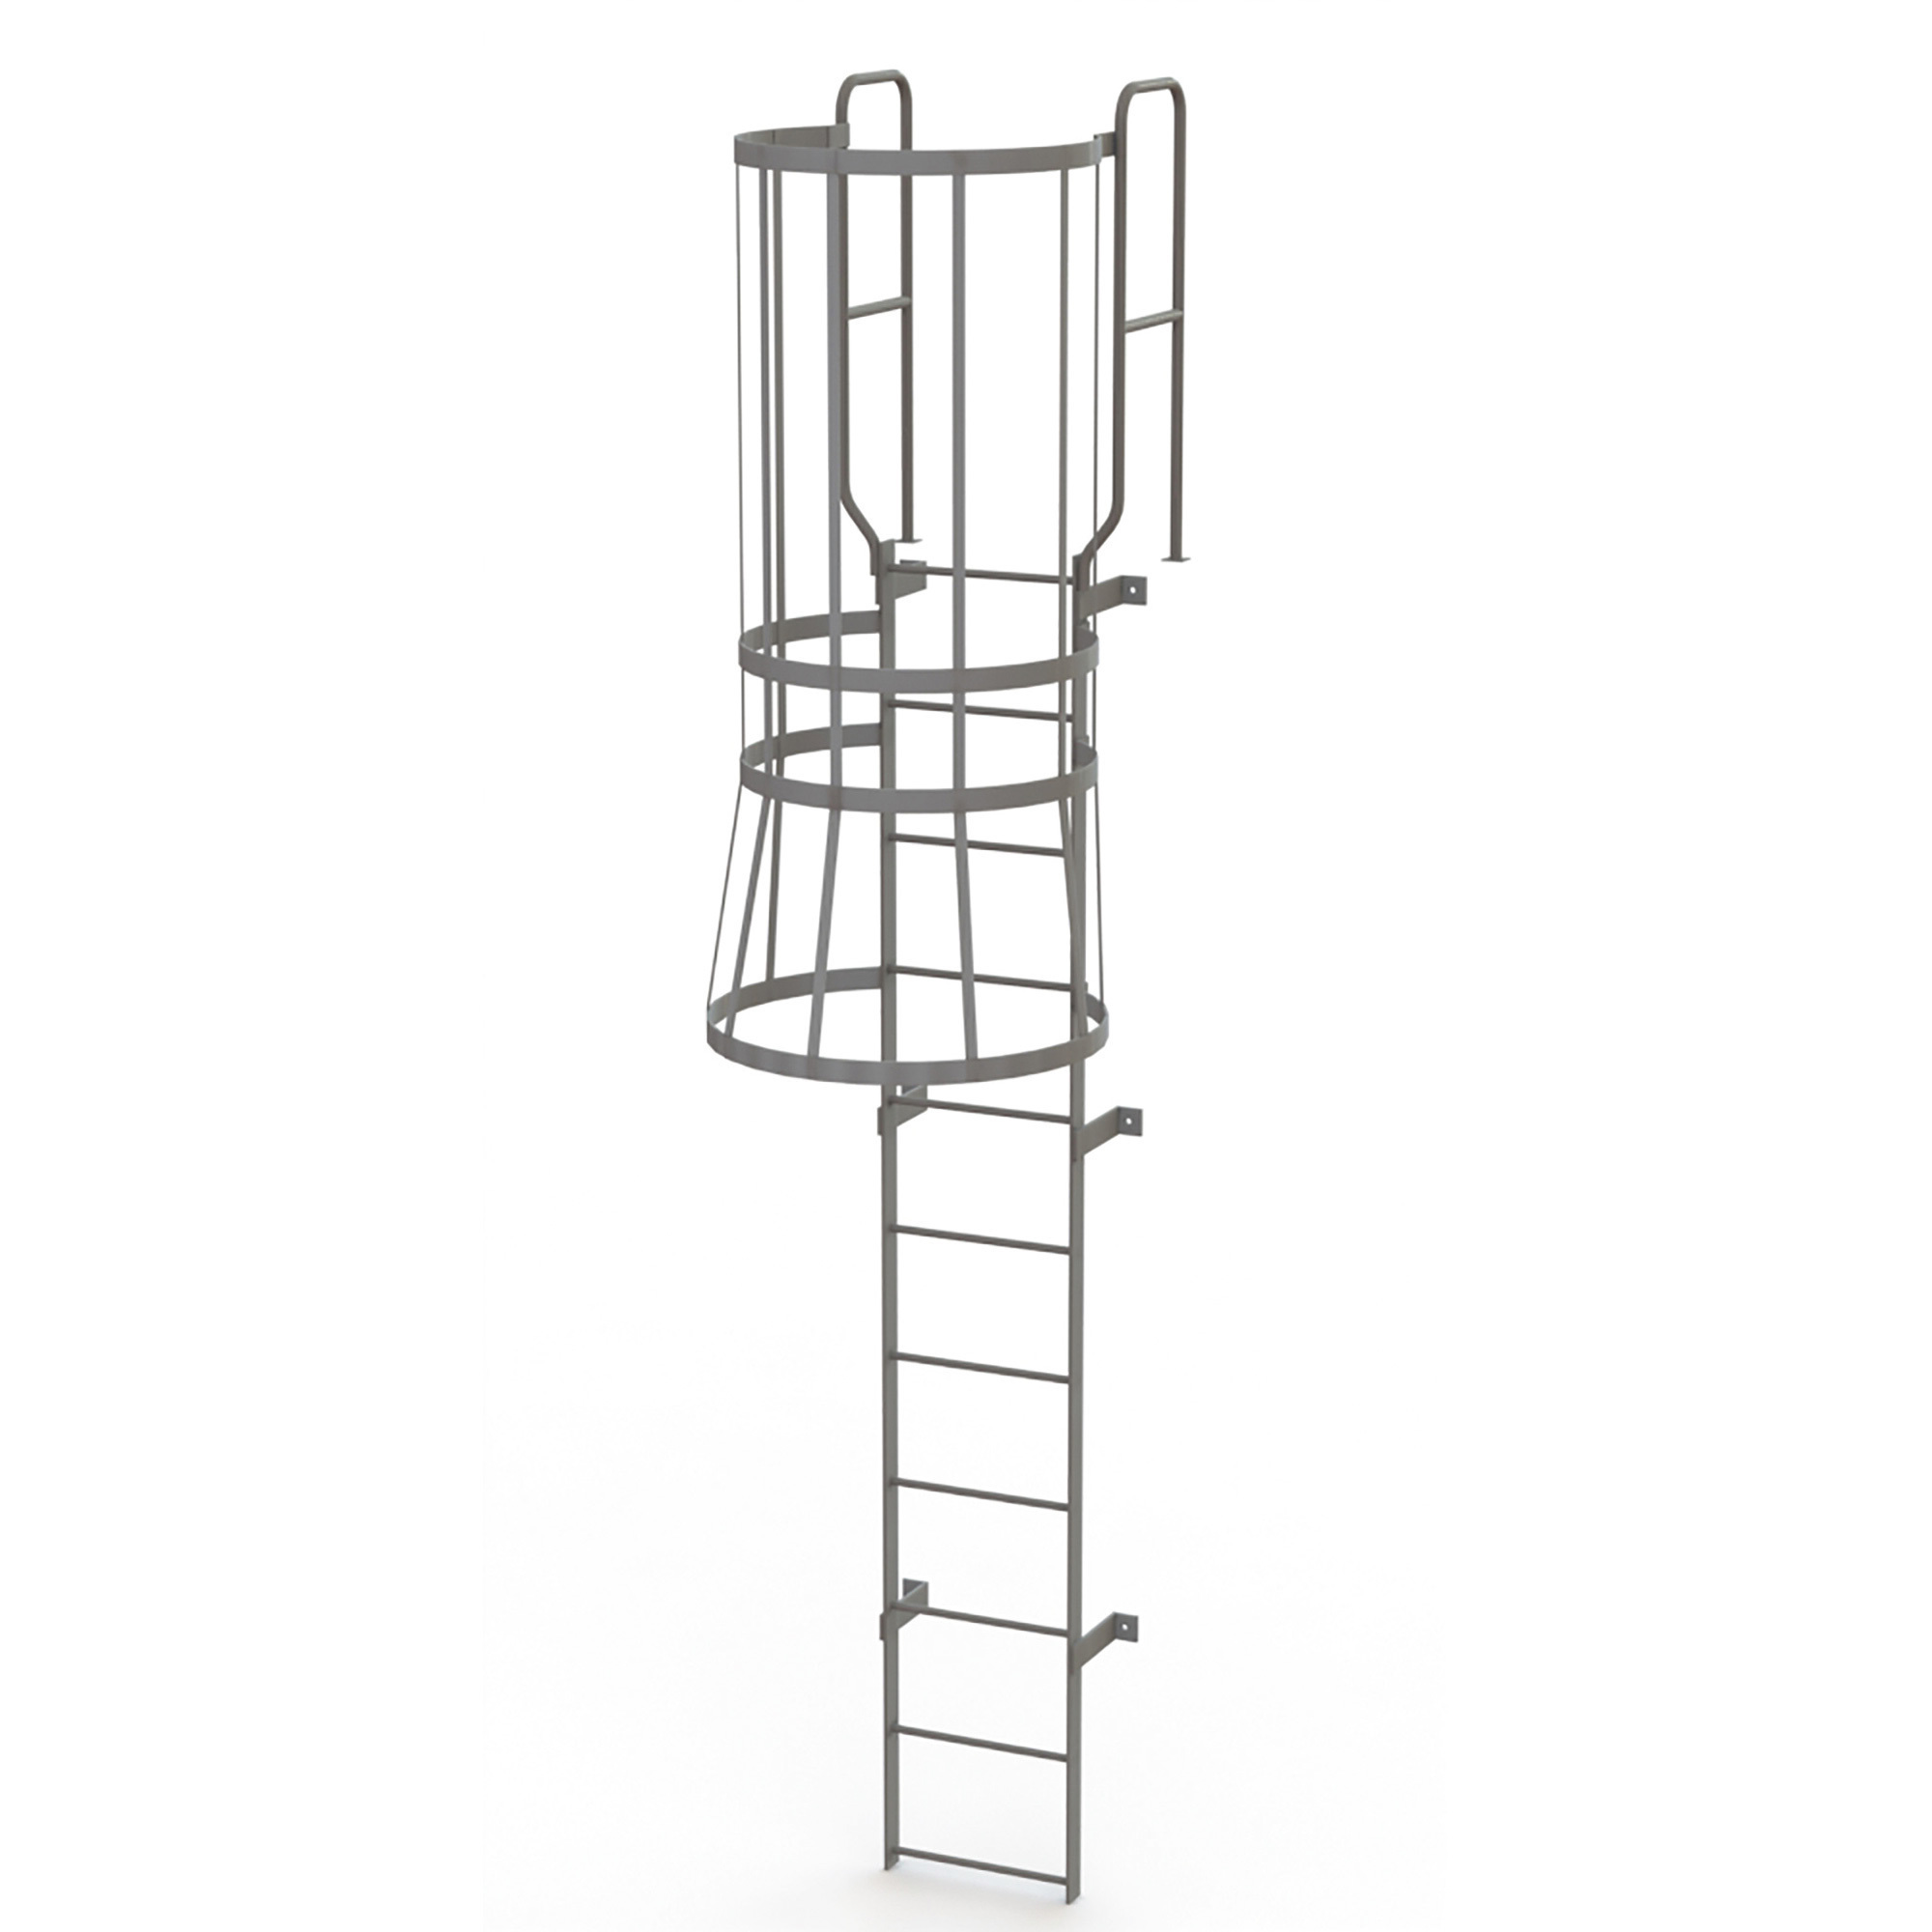 Tri-Arc 10ft., 11-Rung, Steel Fixed Cage Ladder â Gray, 500-Lb. Capacity, 45Inch W x 34.5Inch D x 167 5/8Inch H, Model WLFC1211